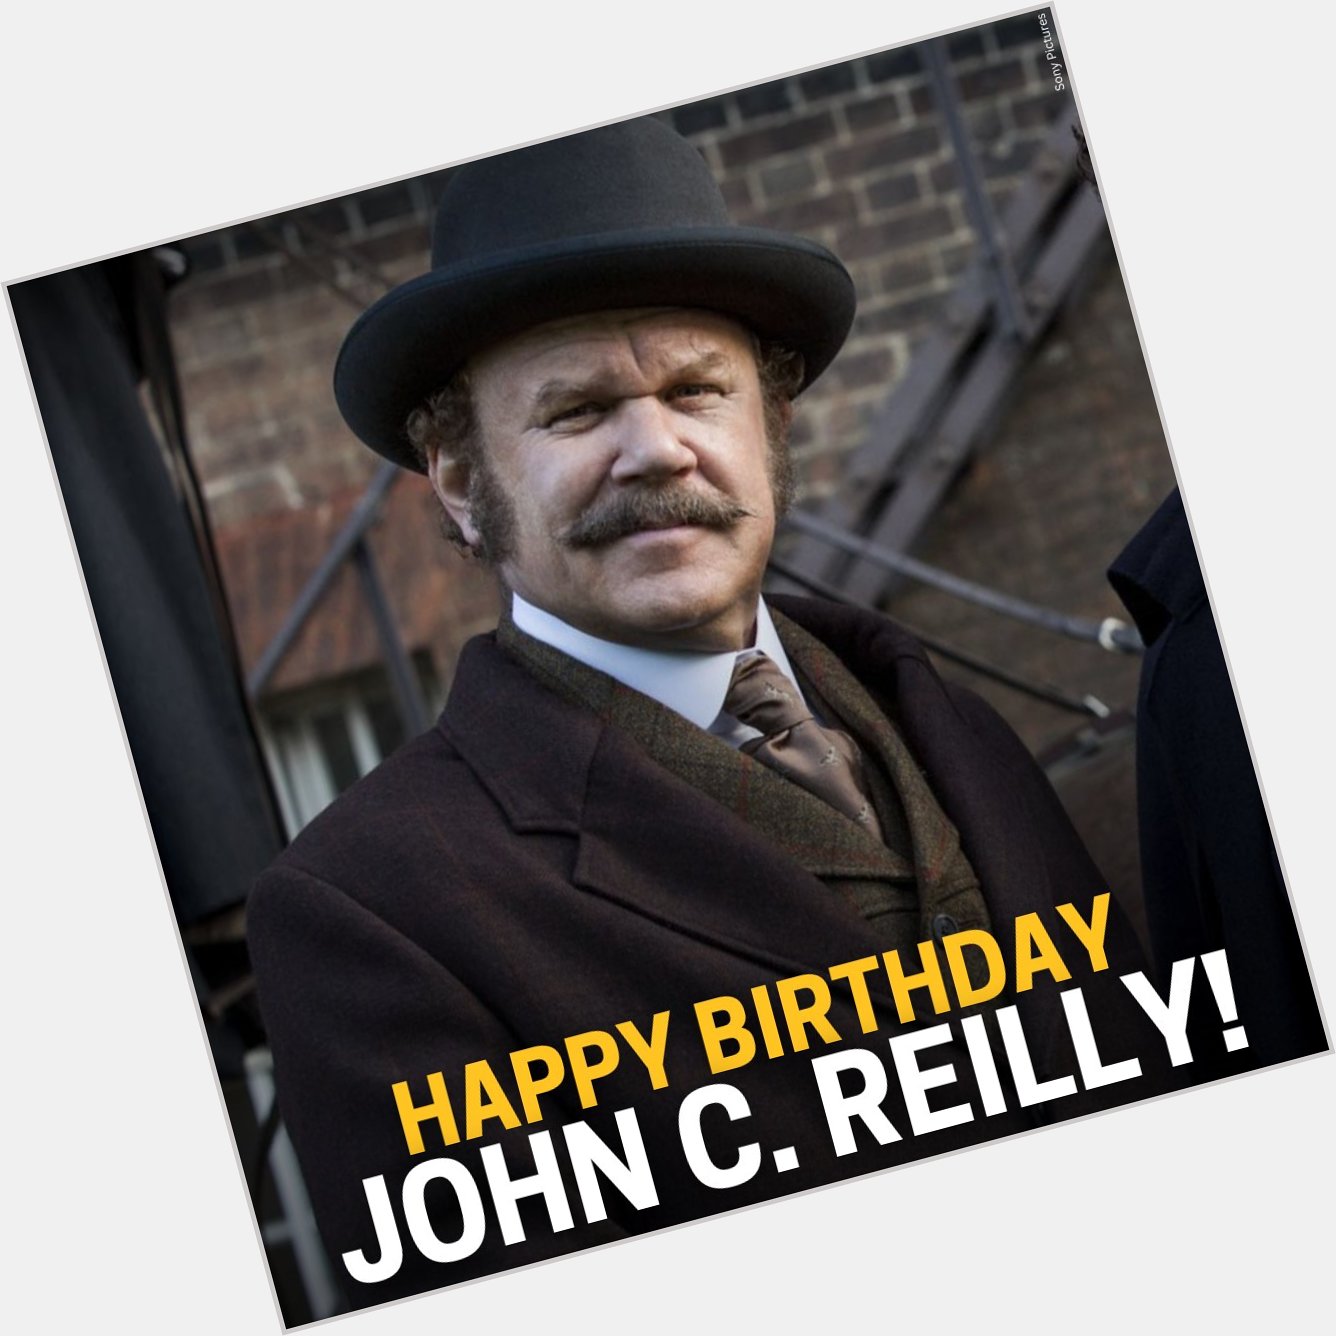 Happy Birthday John C. Reilly! What\s your favorite movie of his? 